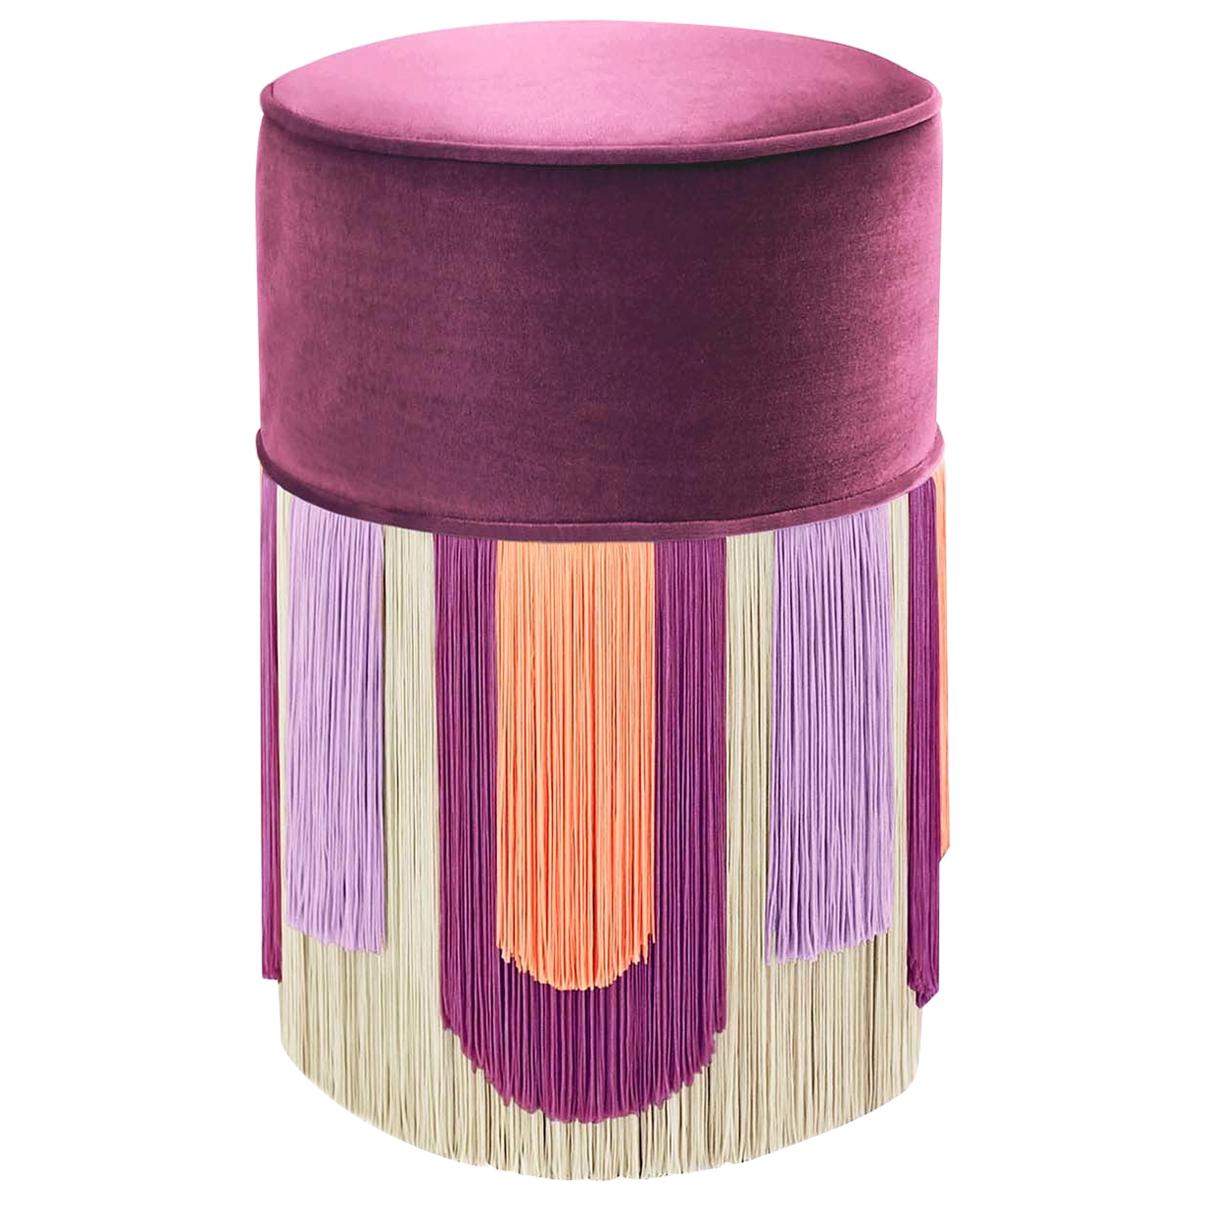 Plum Couture Geometric Couture Deco Pouf For Sale